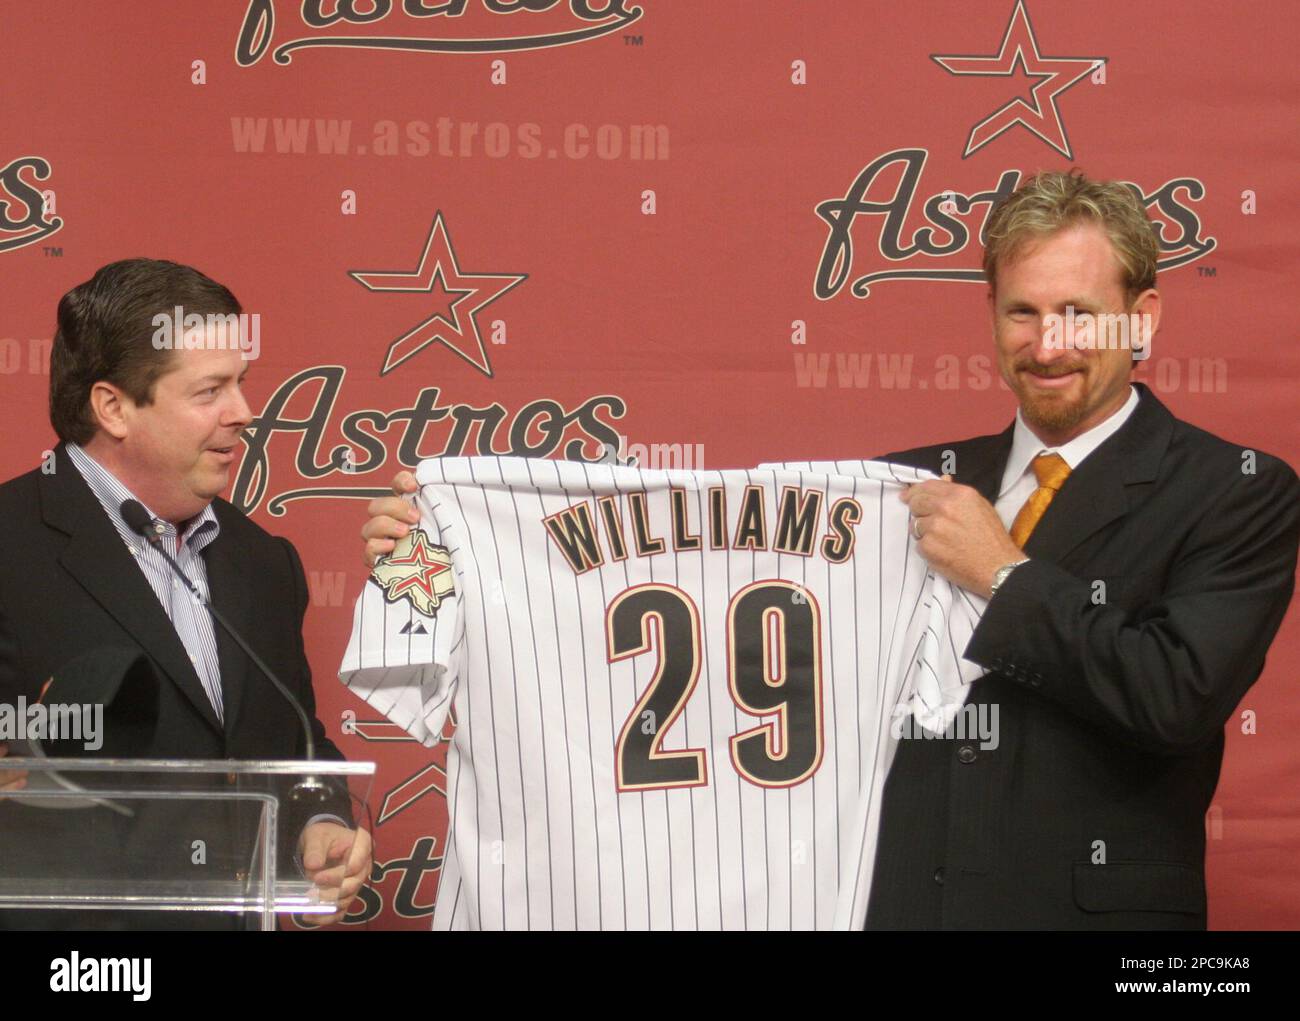 Houston Astros pitcher Woody Williams holds his jersey after